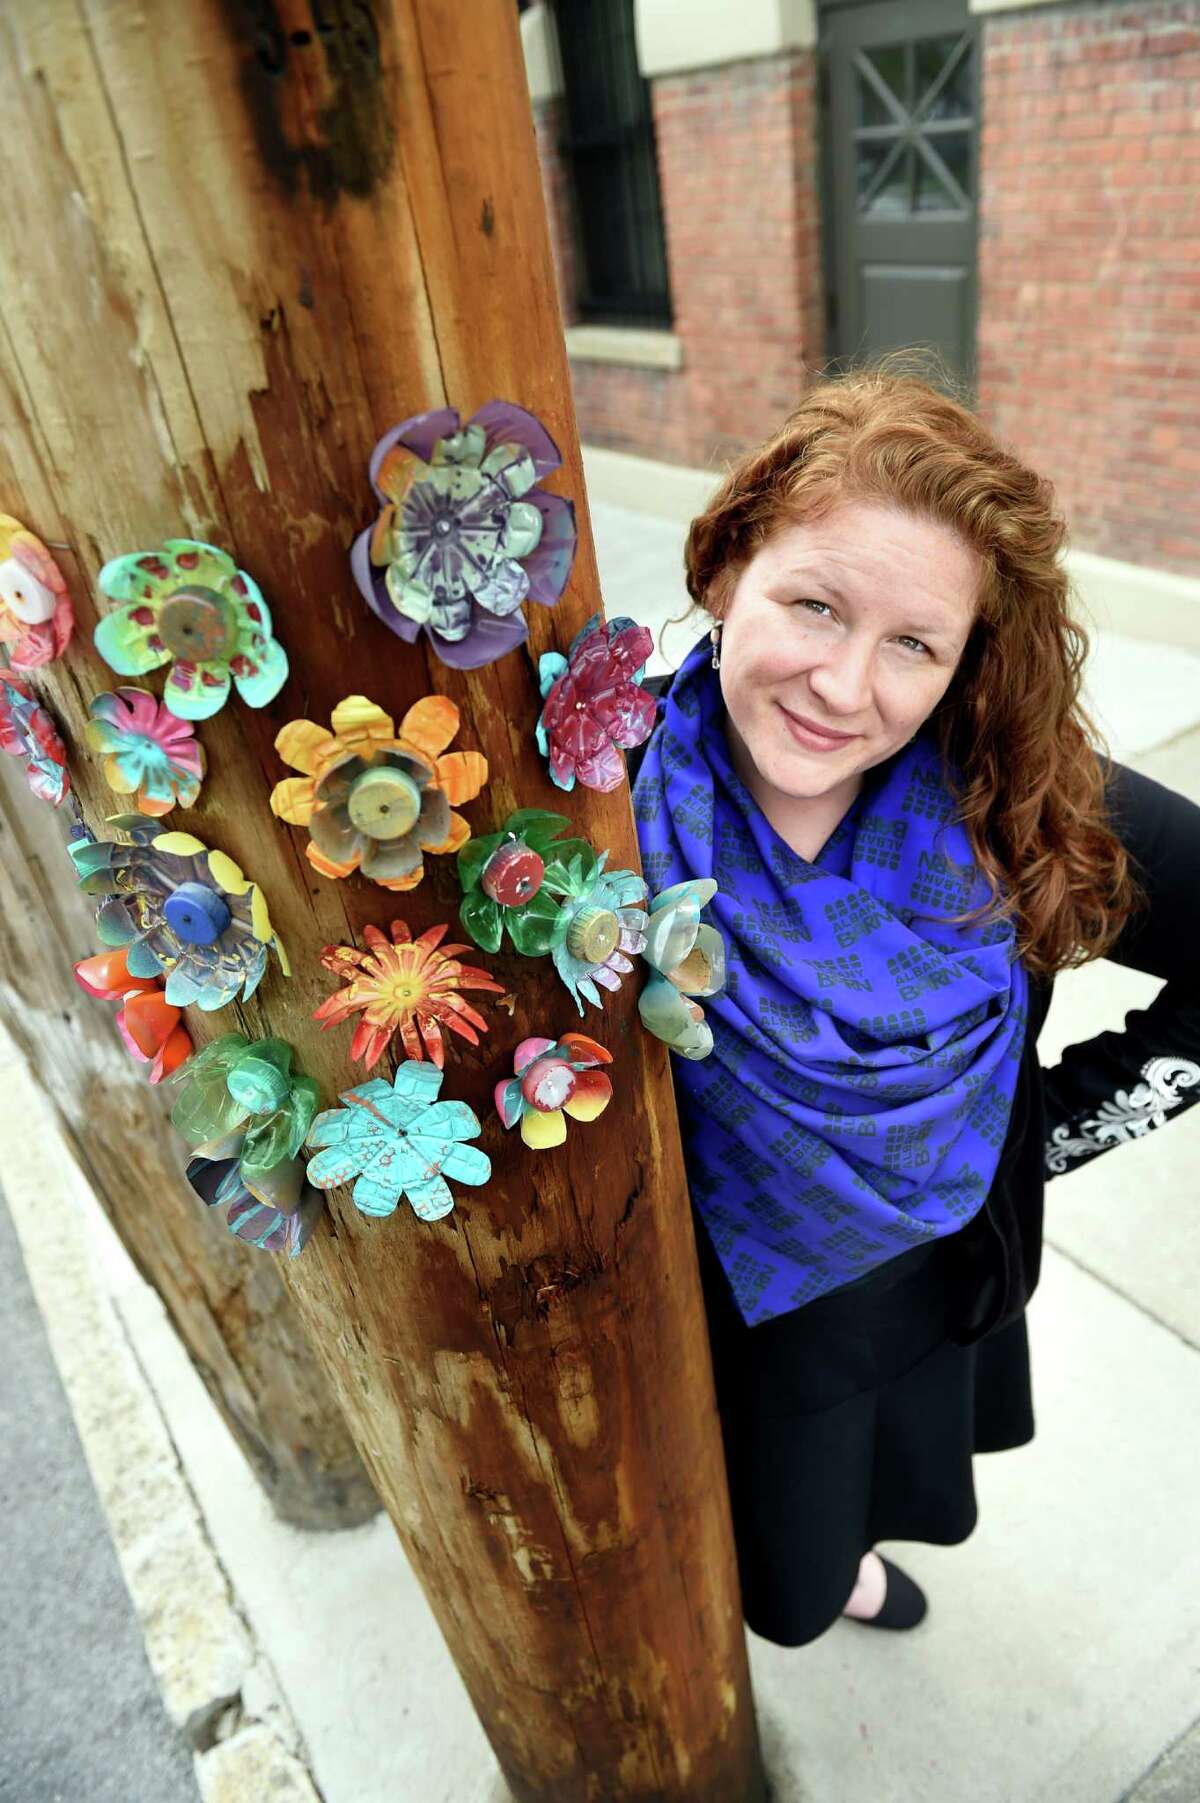 Executive Director Kristen Holler with a utility pole she decorated with flowers made from plastic bottles and caps on Tuesday, May 17, 2016, at the Albany Barn in Albany, N.Y. (Cindy Schultz / Times Union)